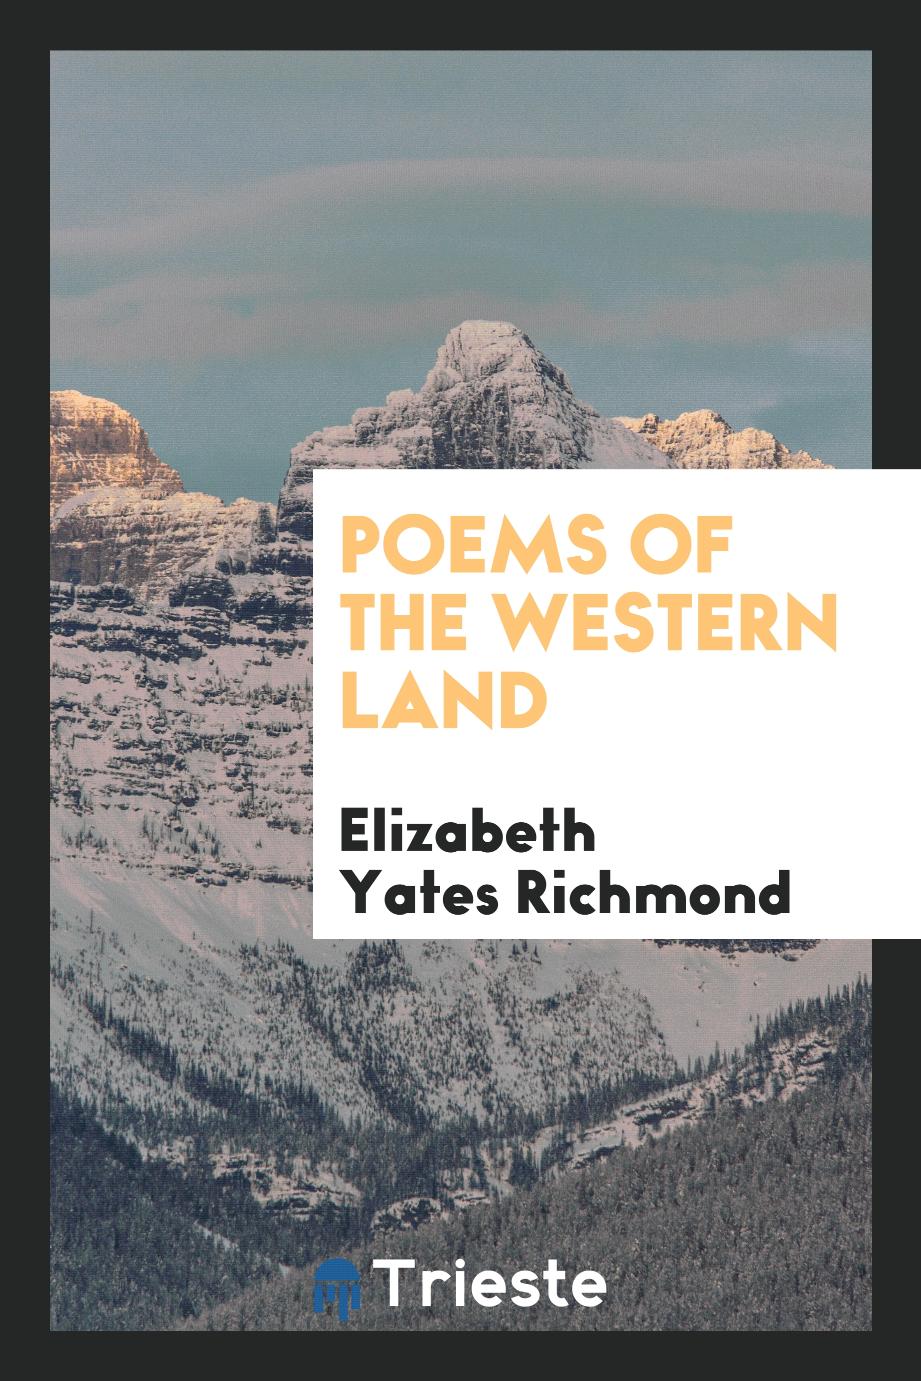 Poems of the Western land